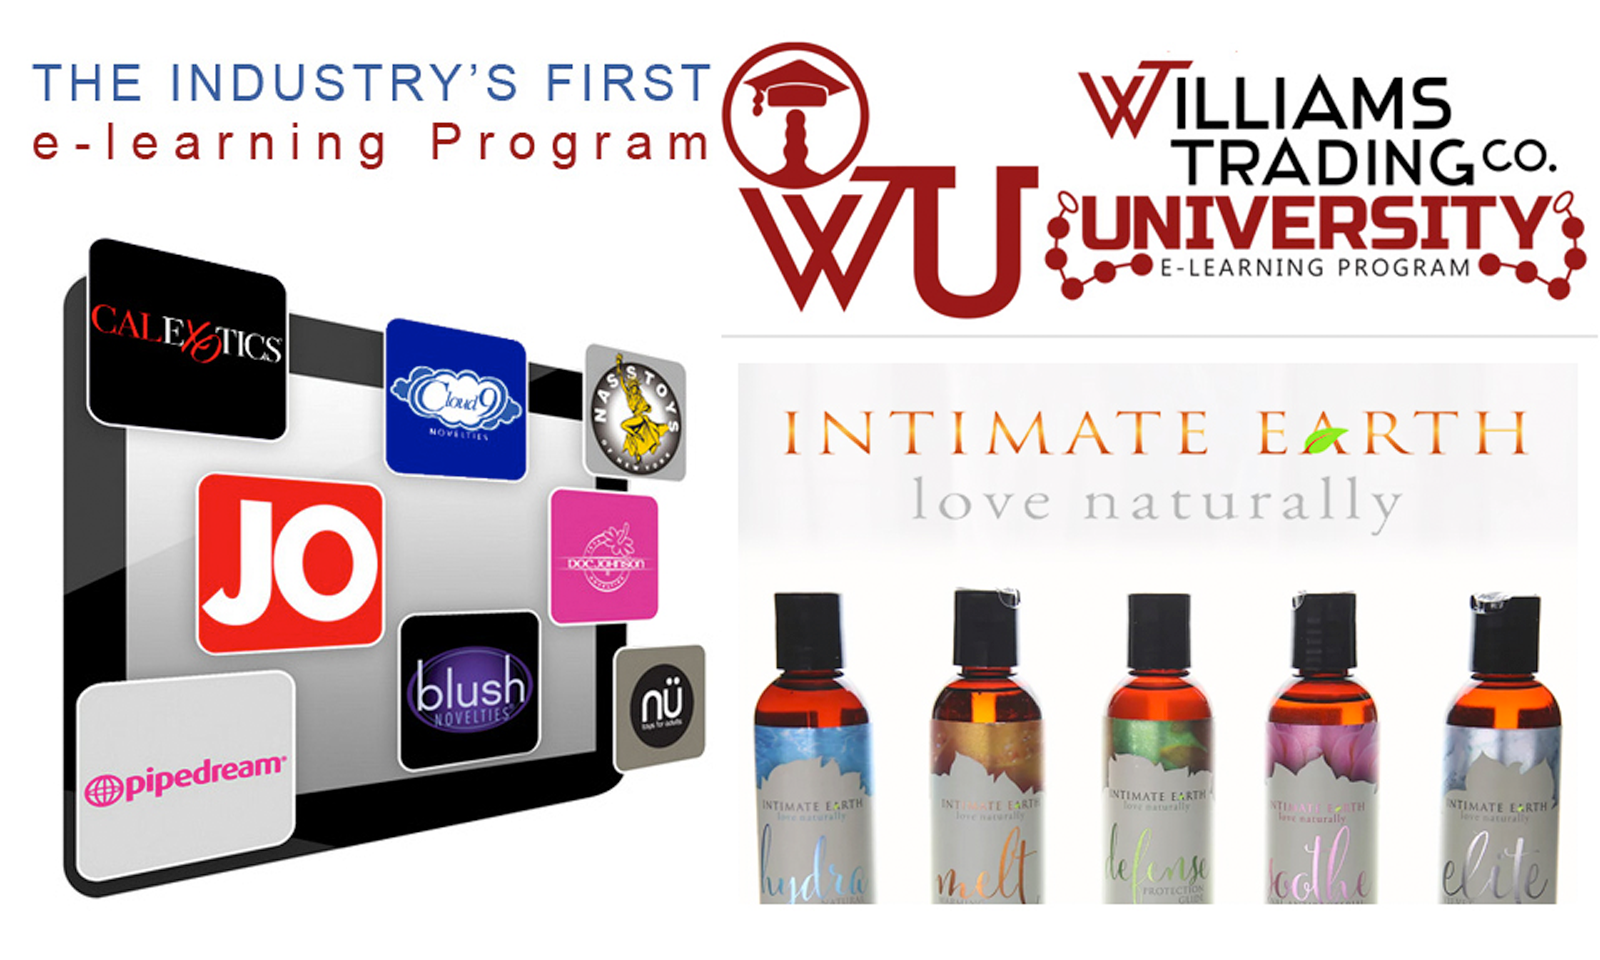 New Intimate Earth on Williams Trading University Site